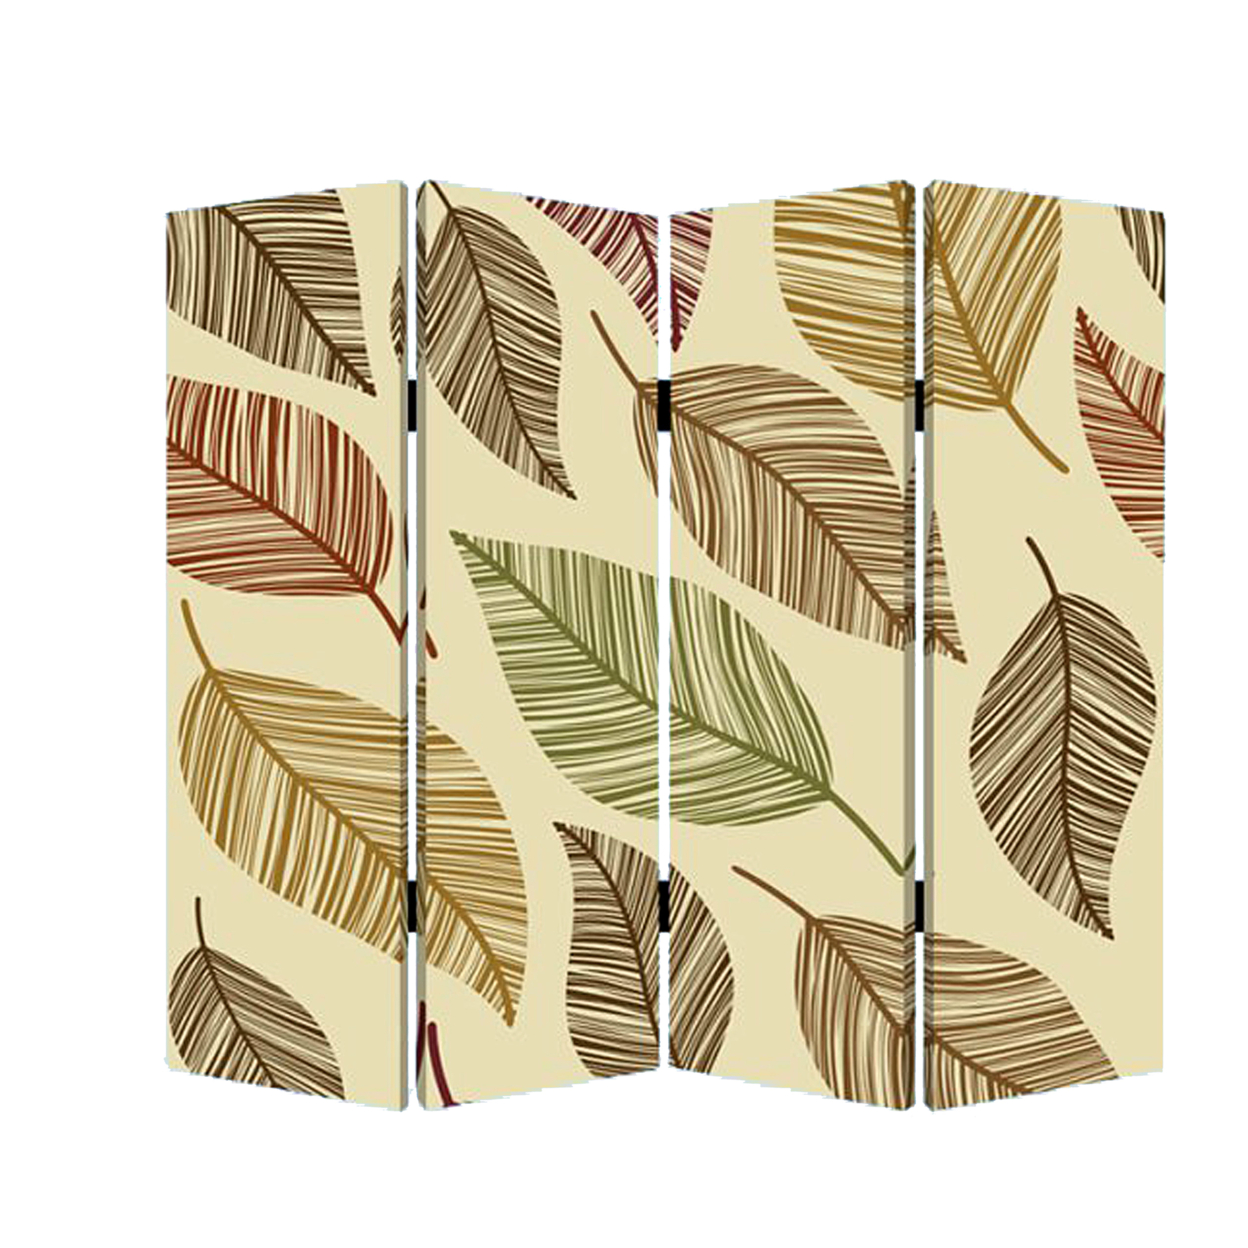 3 Panel Canvas Made Foldable Screen With Leaf Print, Multicolor- Saltoro Sherpi